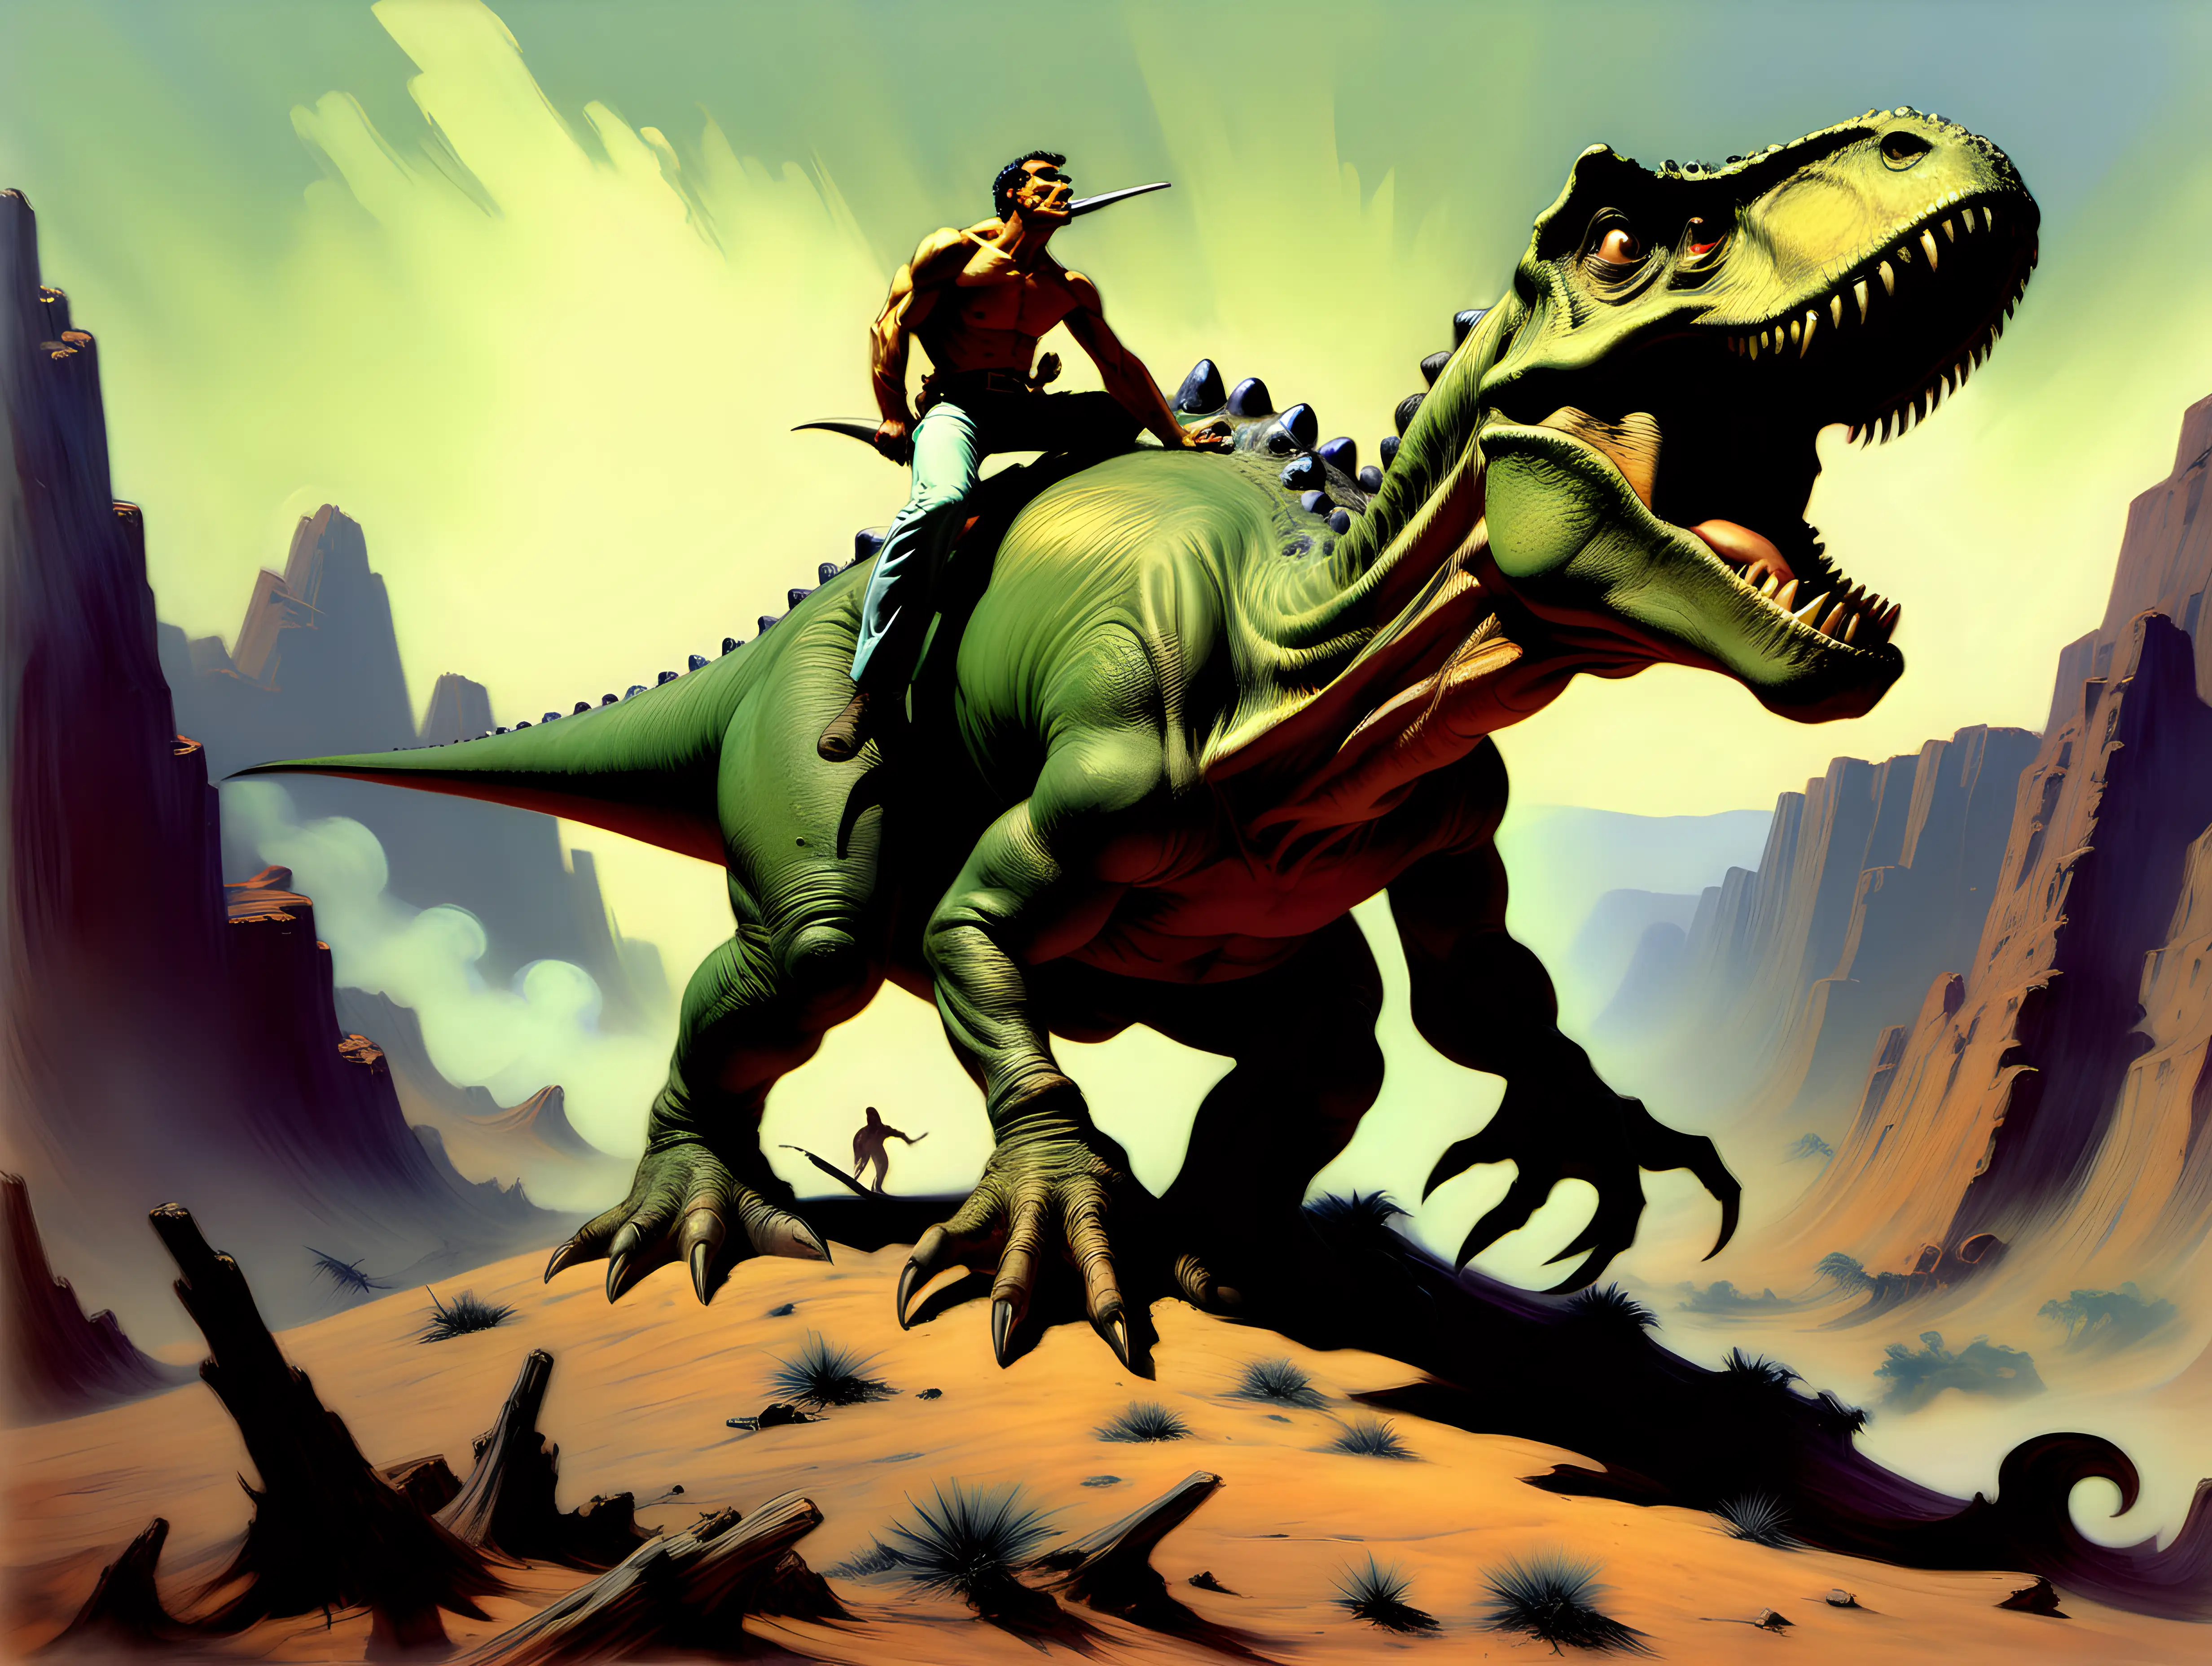 man on the back of a dinosaur stuck in the valley of death 
Frank Frazetta style